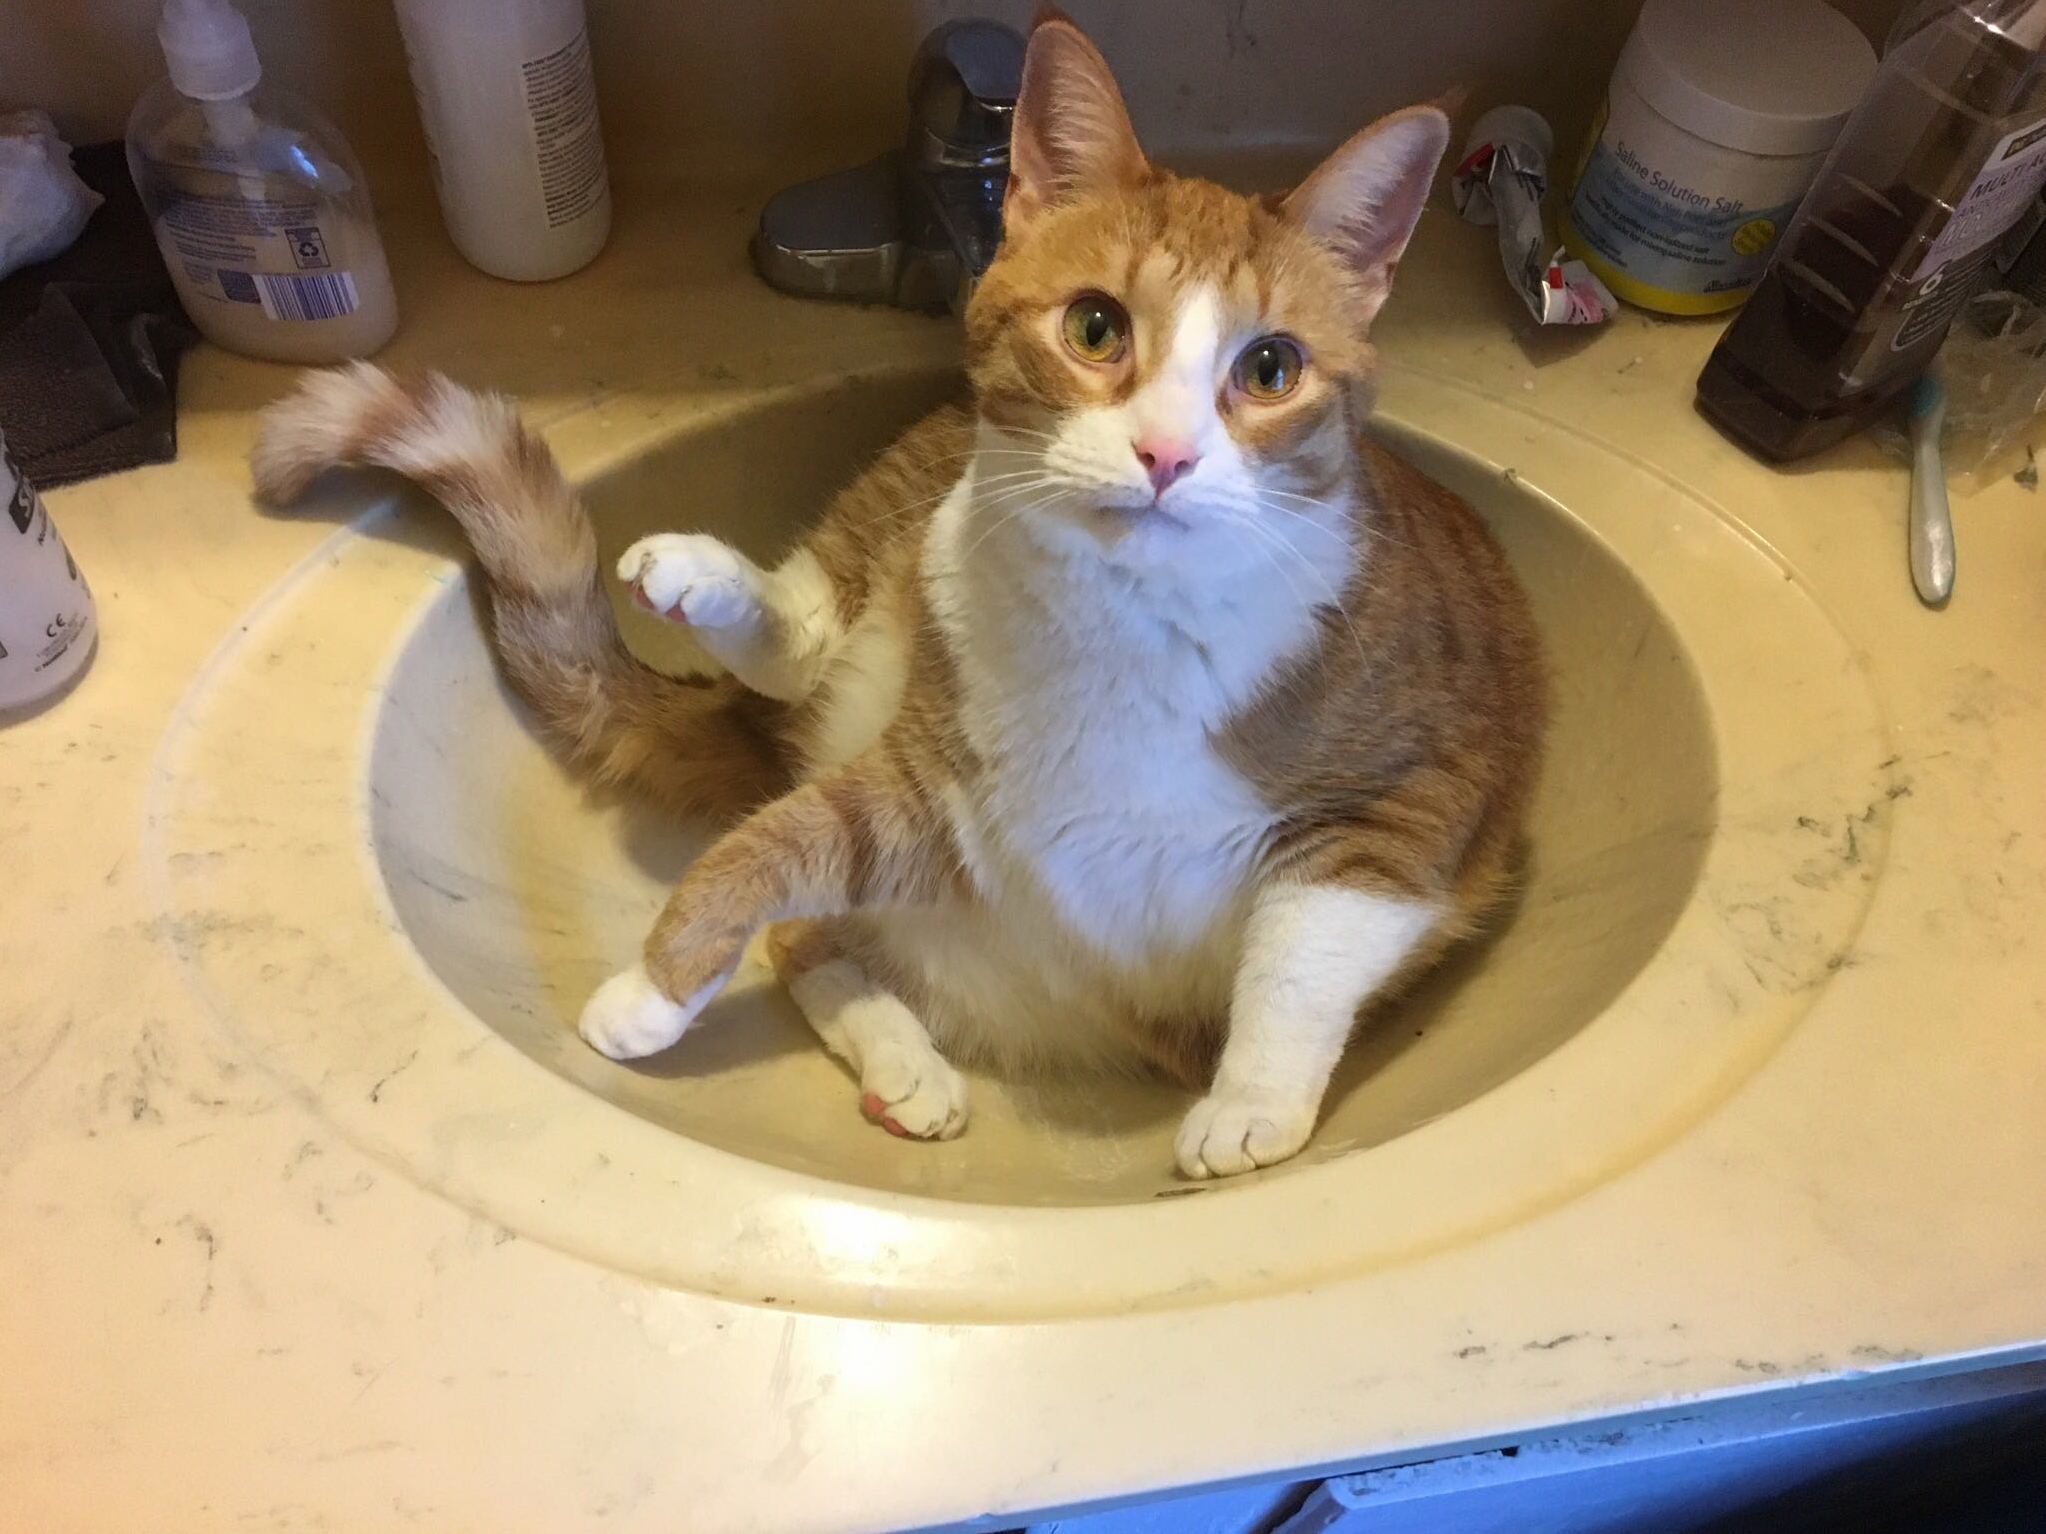 Tony soprano the cat washing his junk in the sink